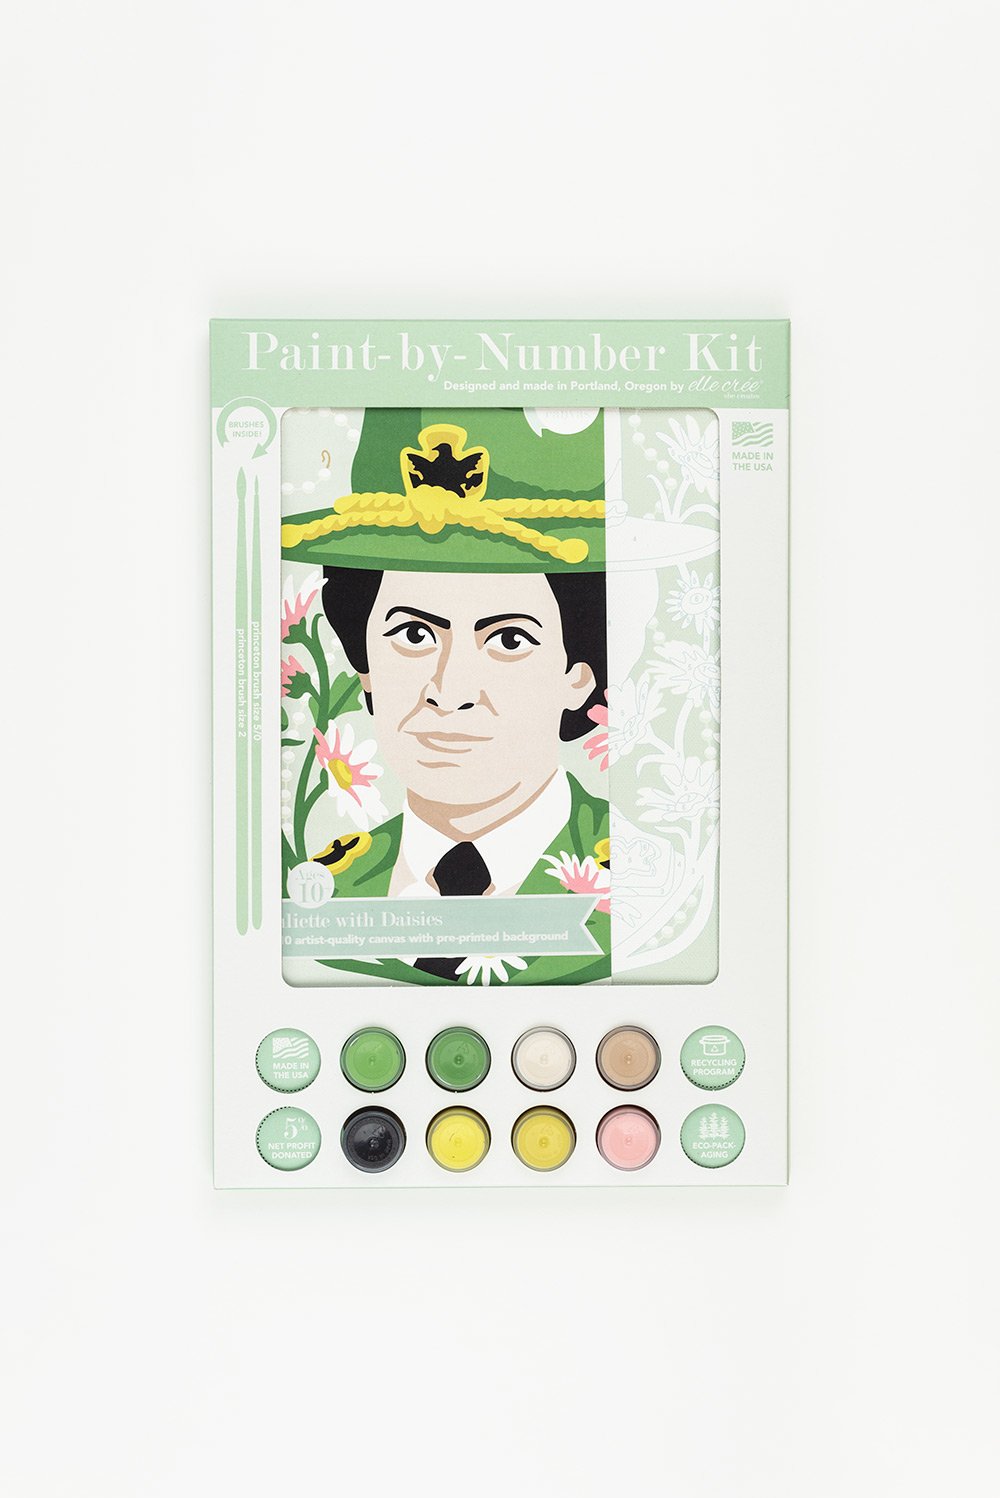 Paint by Numbers Kit Poster – diyartpaint